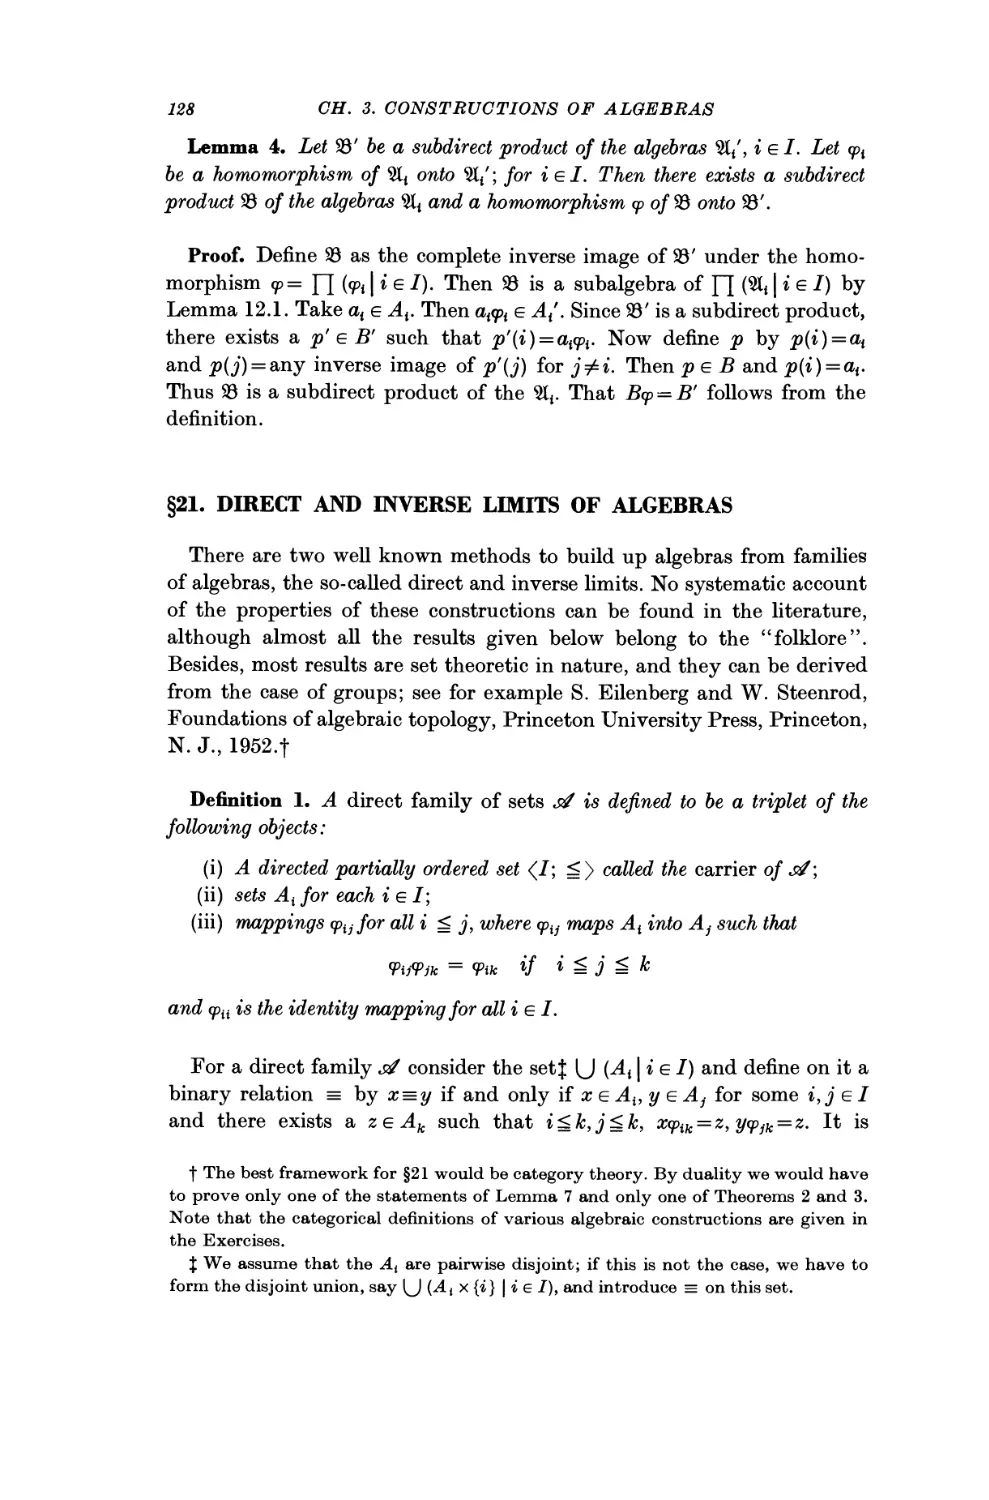 §21. Direct and Inverse Limits of Algebras